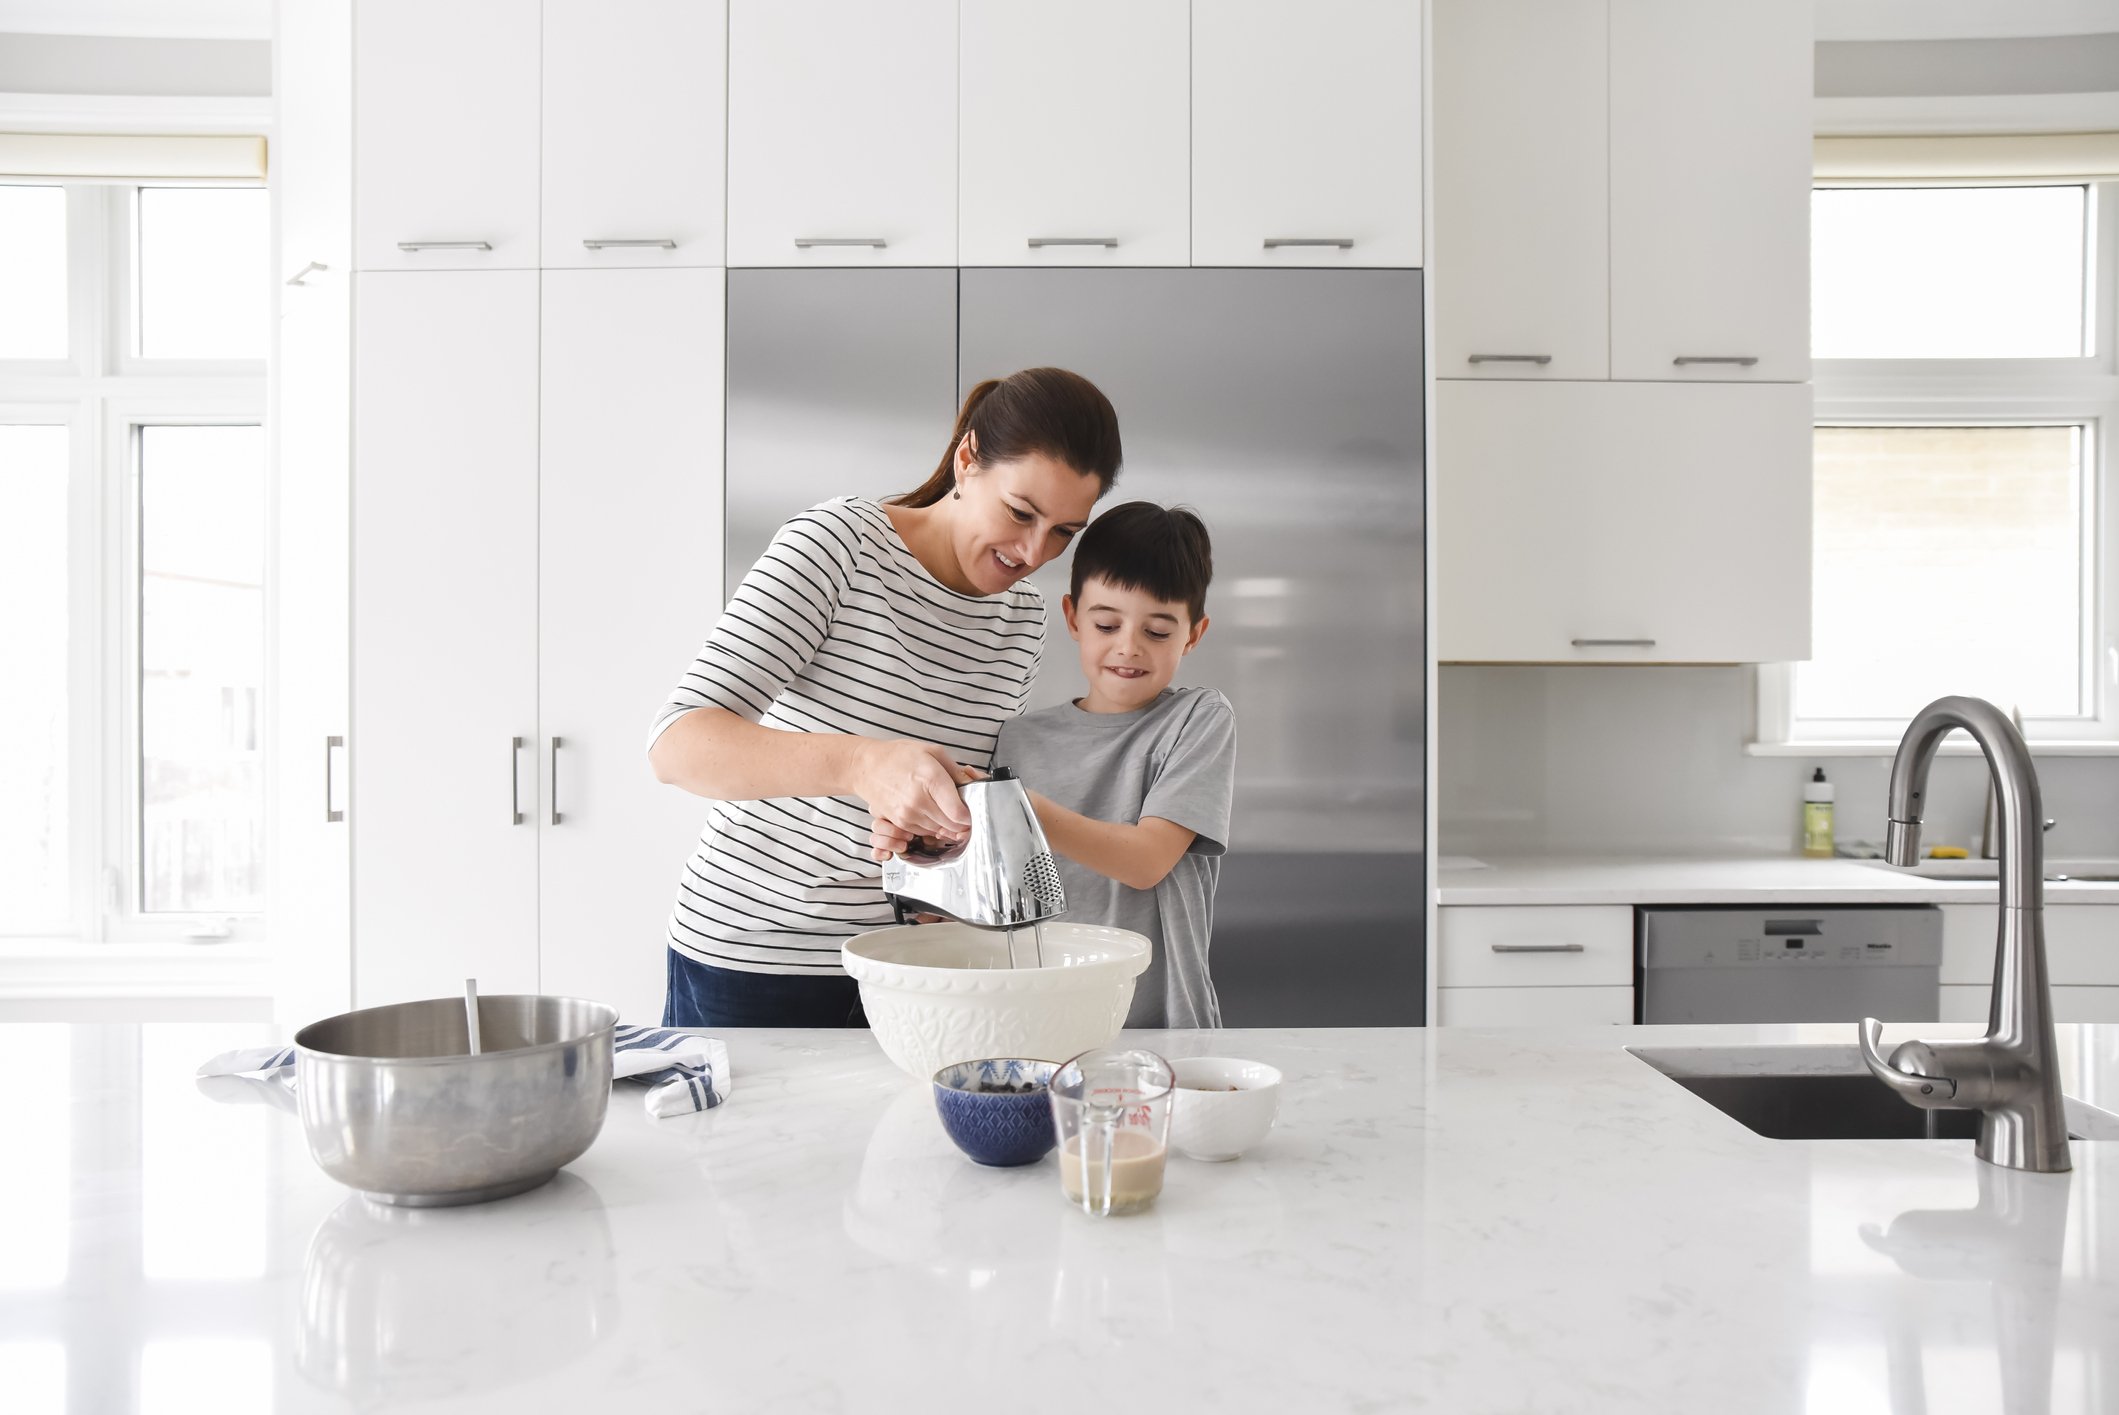 Mother helping young son use a mixer while cooking in a modern kitchen | Photo: Getty Images